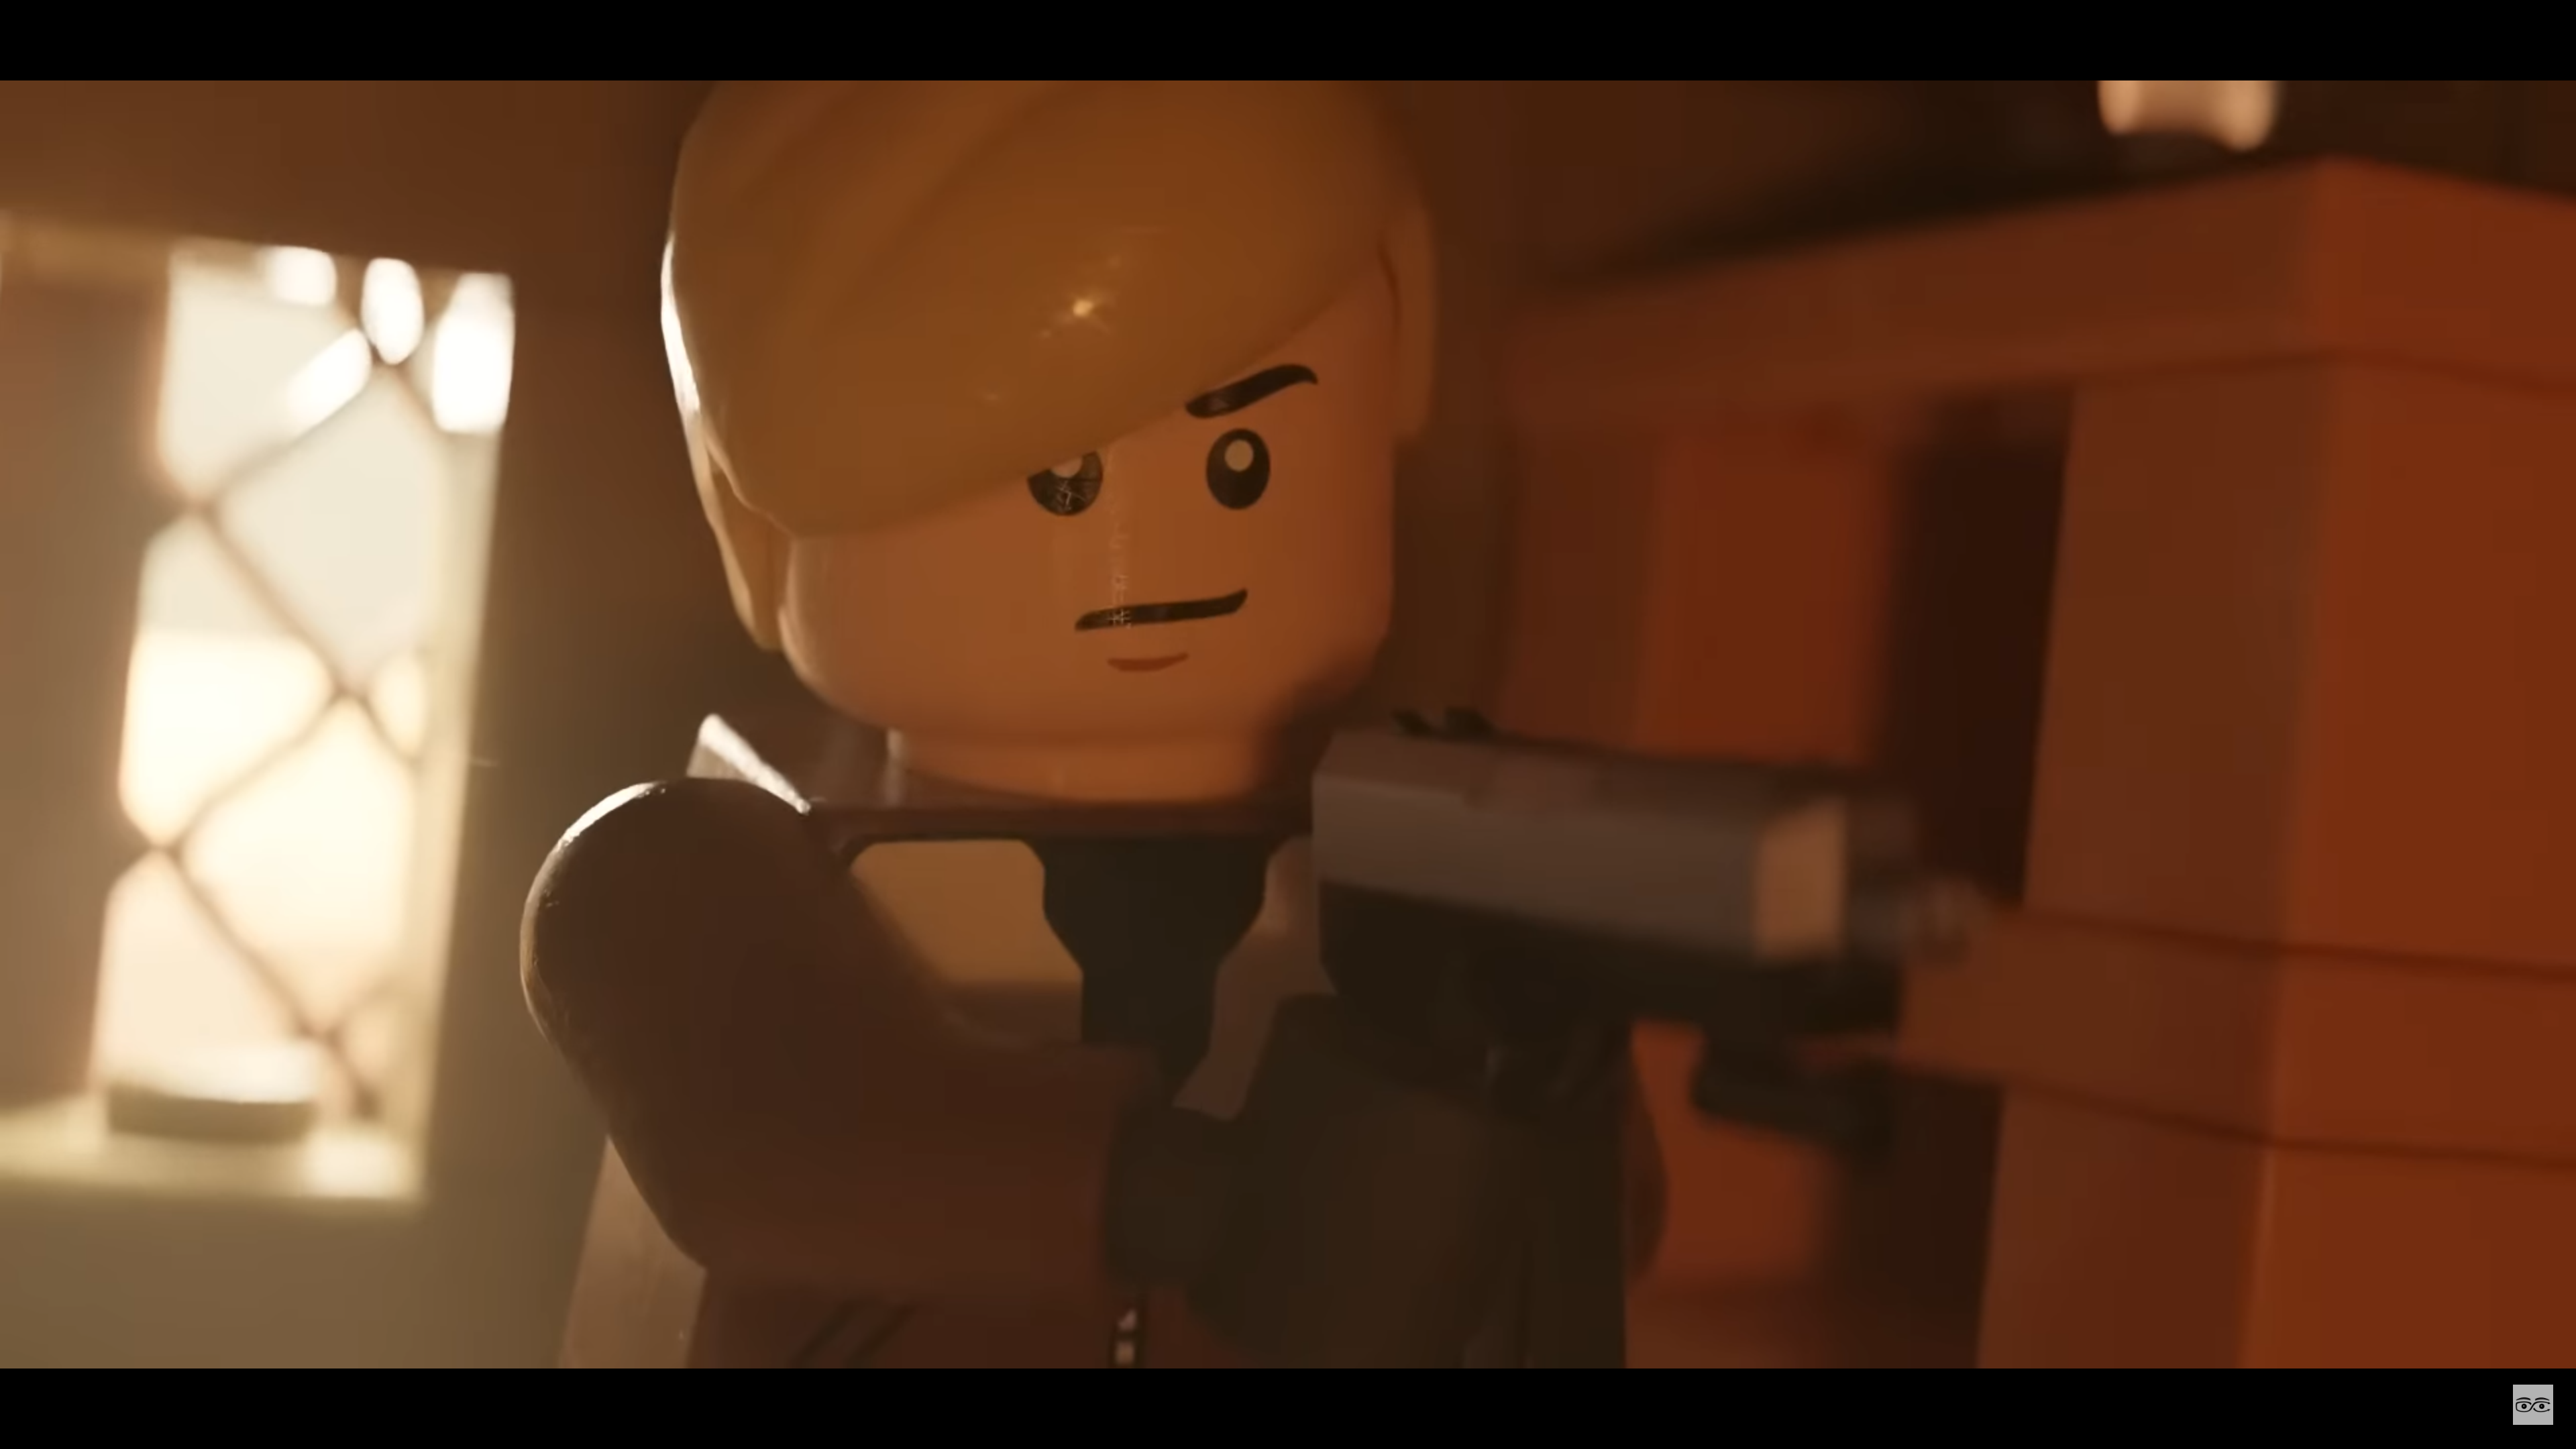 Someone Redid Resident Evil 4’s Intro With Only Lego Pieces